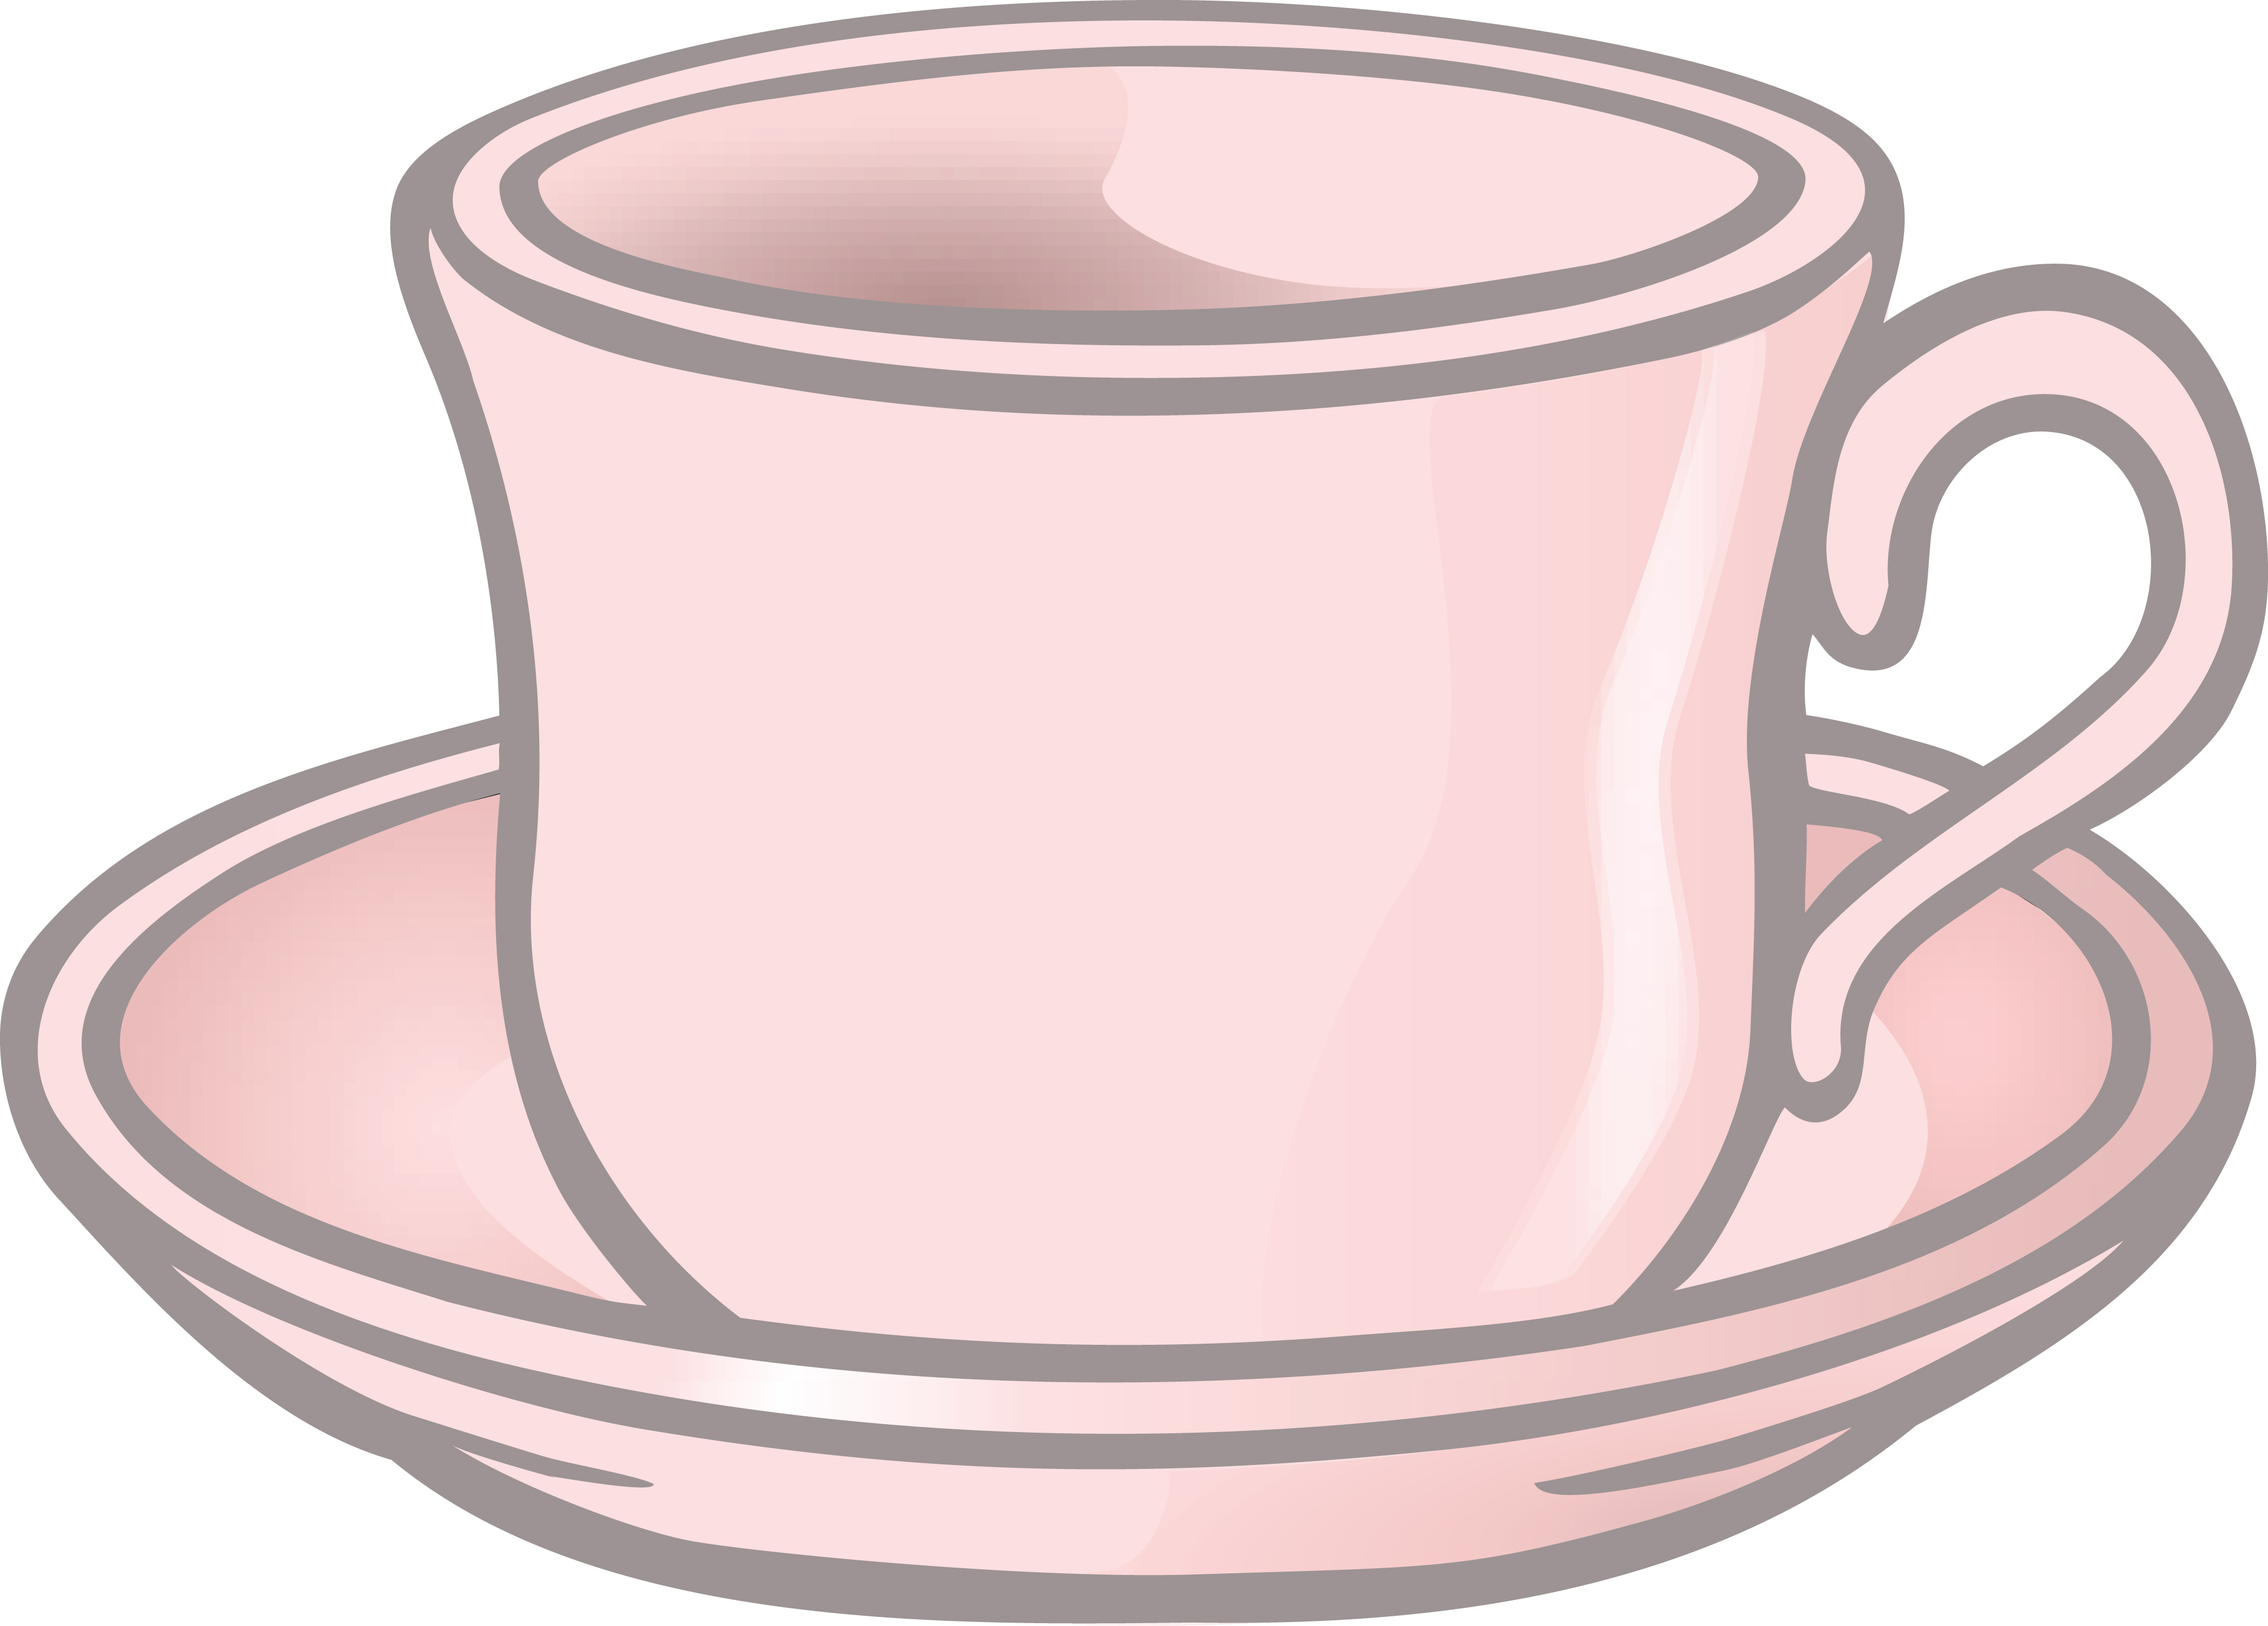 Free Clipart Of A cup of coffee and saucer